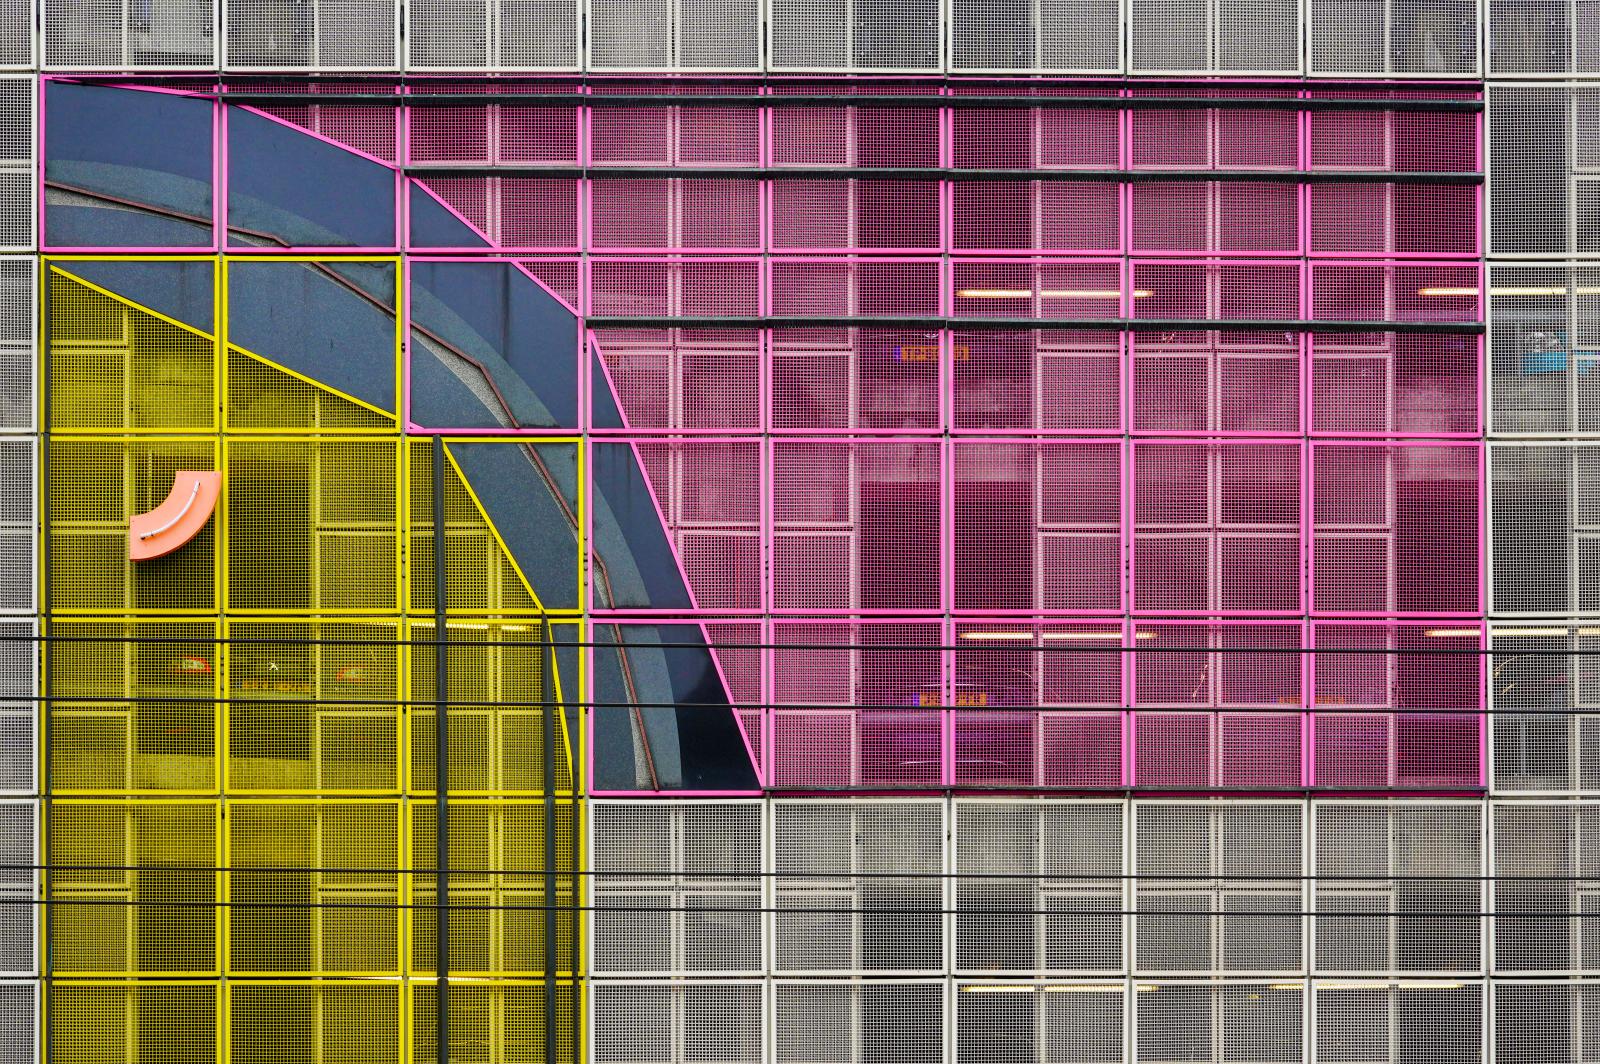 Colorful facade of a Multi-storey car park. | Buy this image